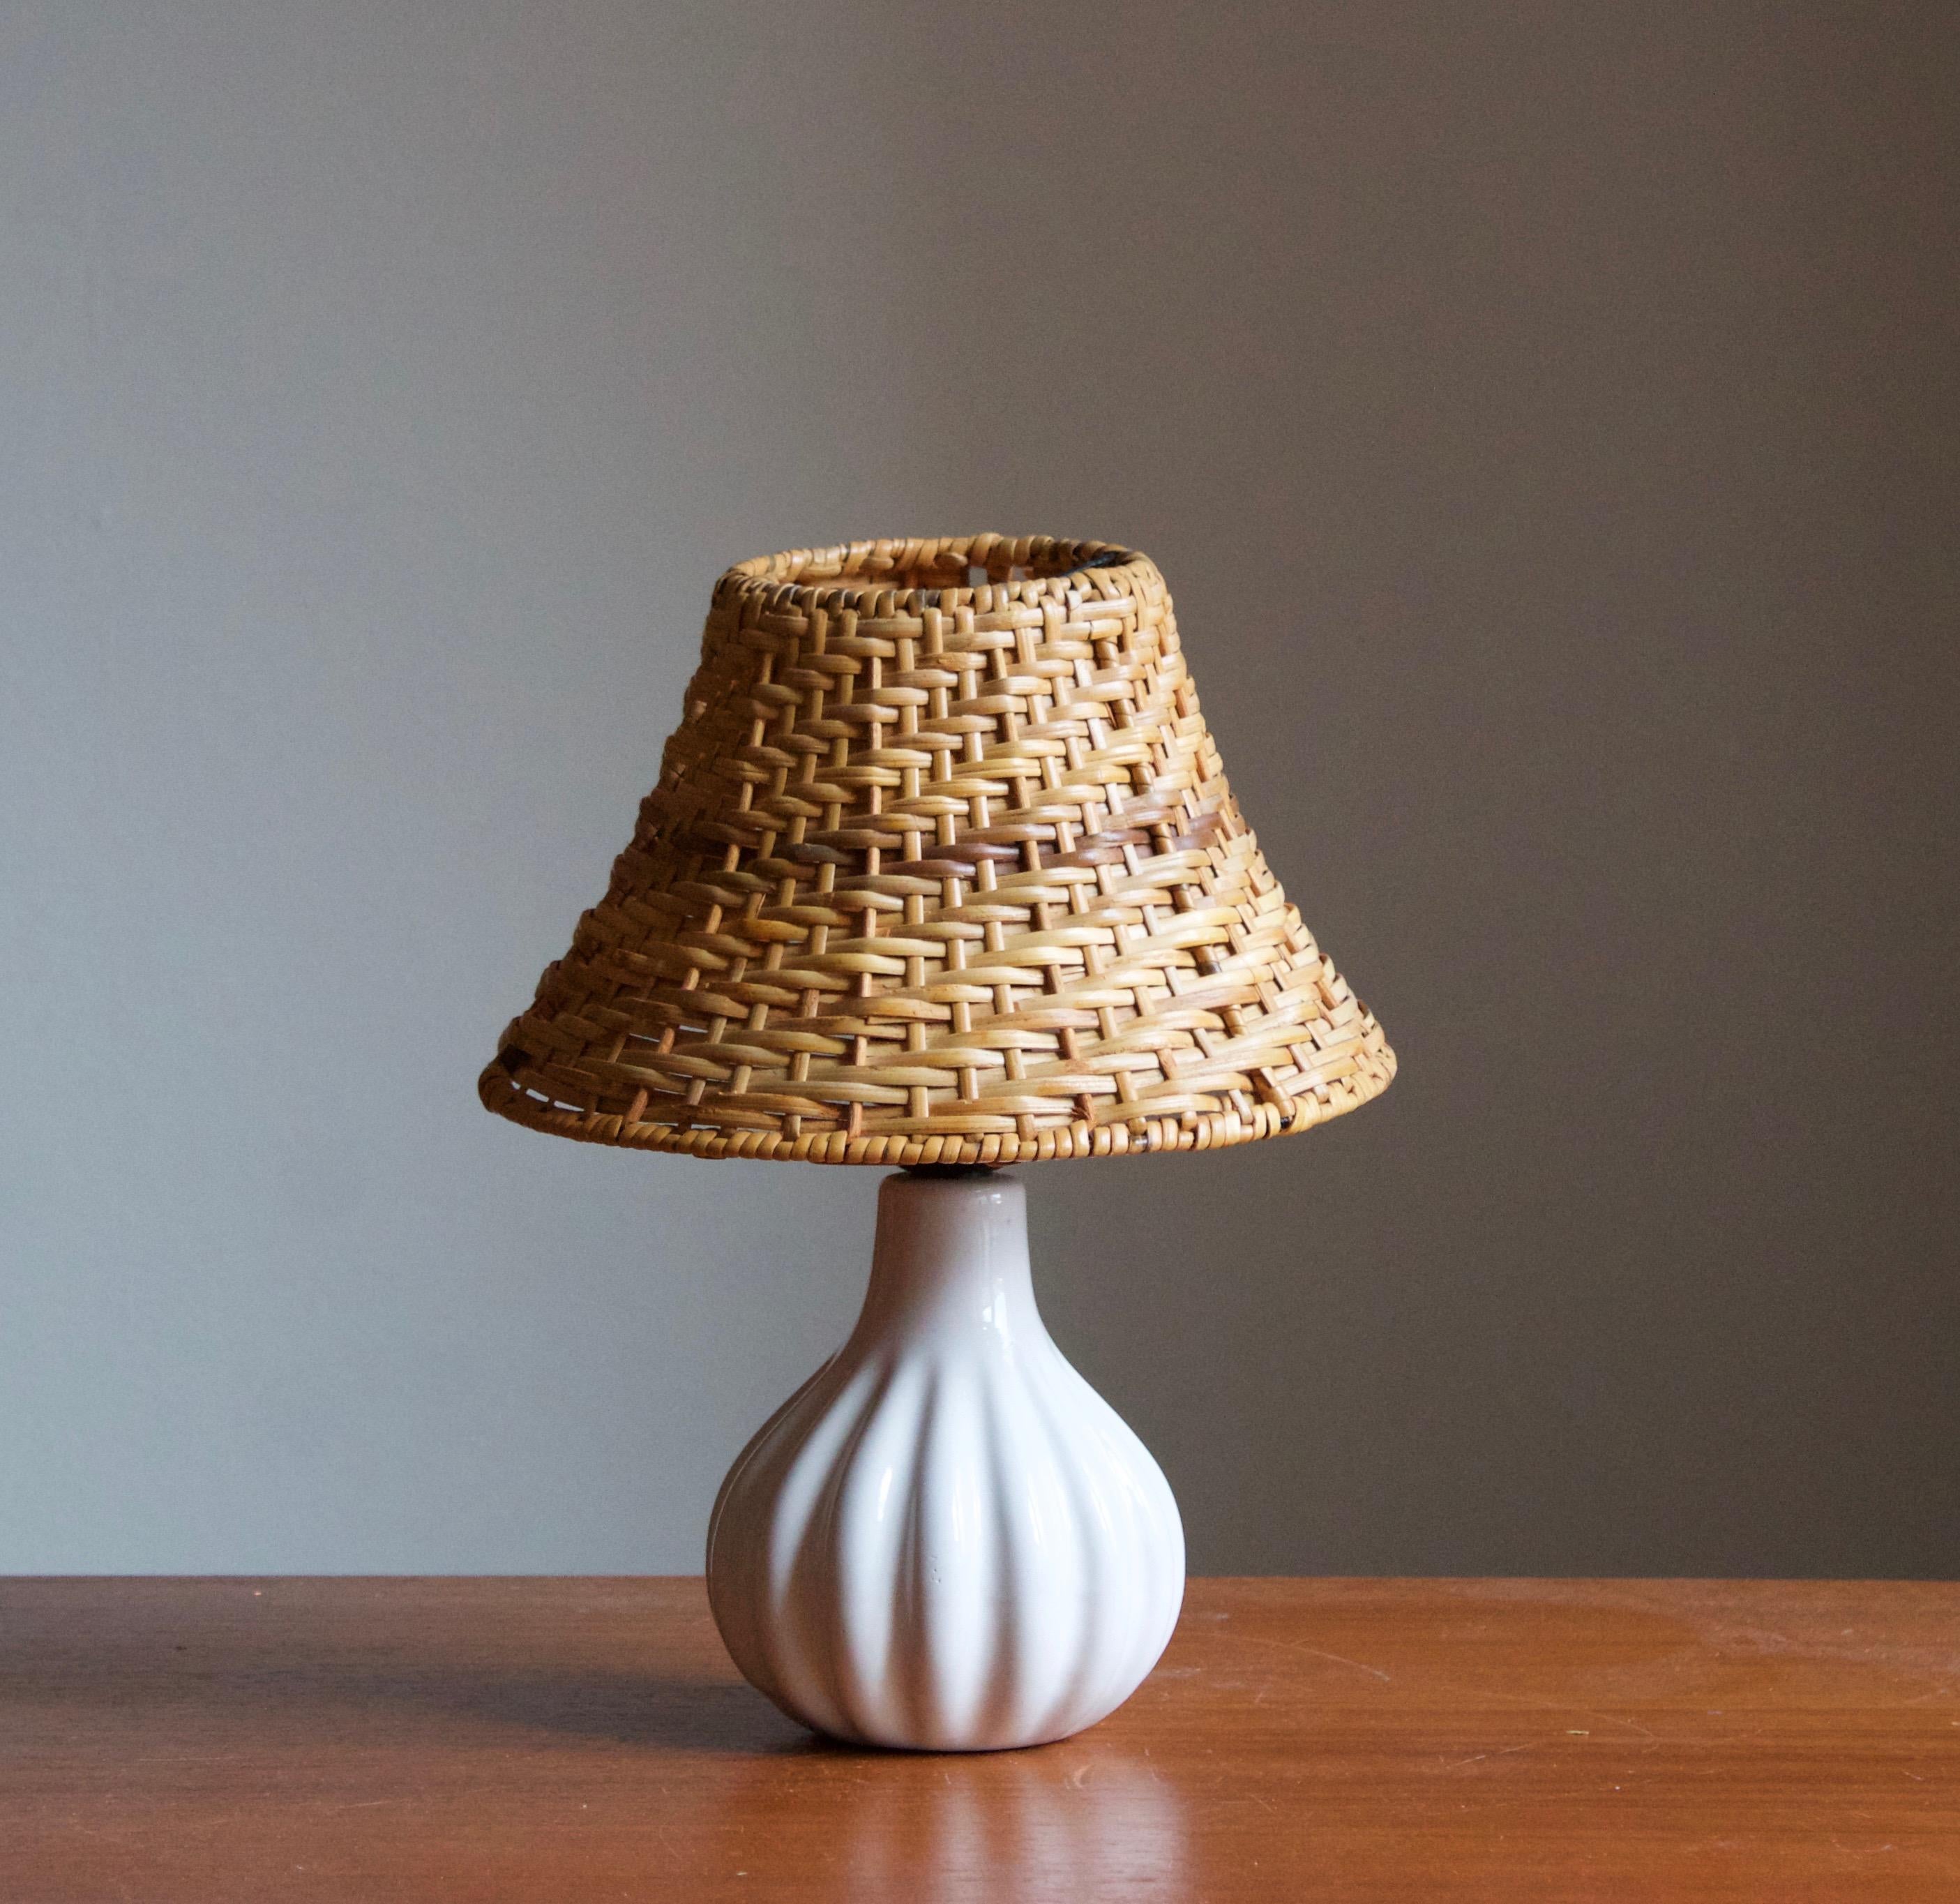 A stoneware table lamps. Produced by Ego Stengods c. 1960s-1970s. Stamped.

Stated dimensions exclude lampshade. Height including socket. Rattan lampshade available upon request.

Other ceramicists of the period include Axel Salto, Arne Bang,